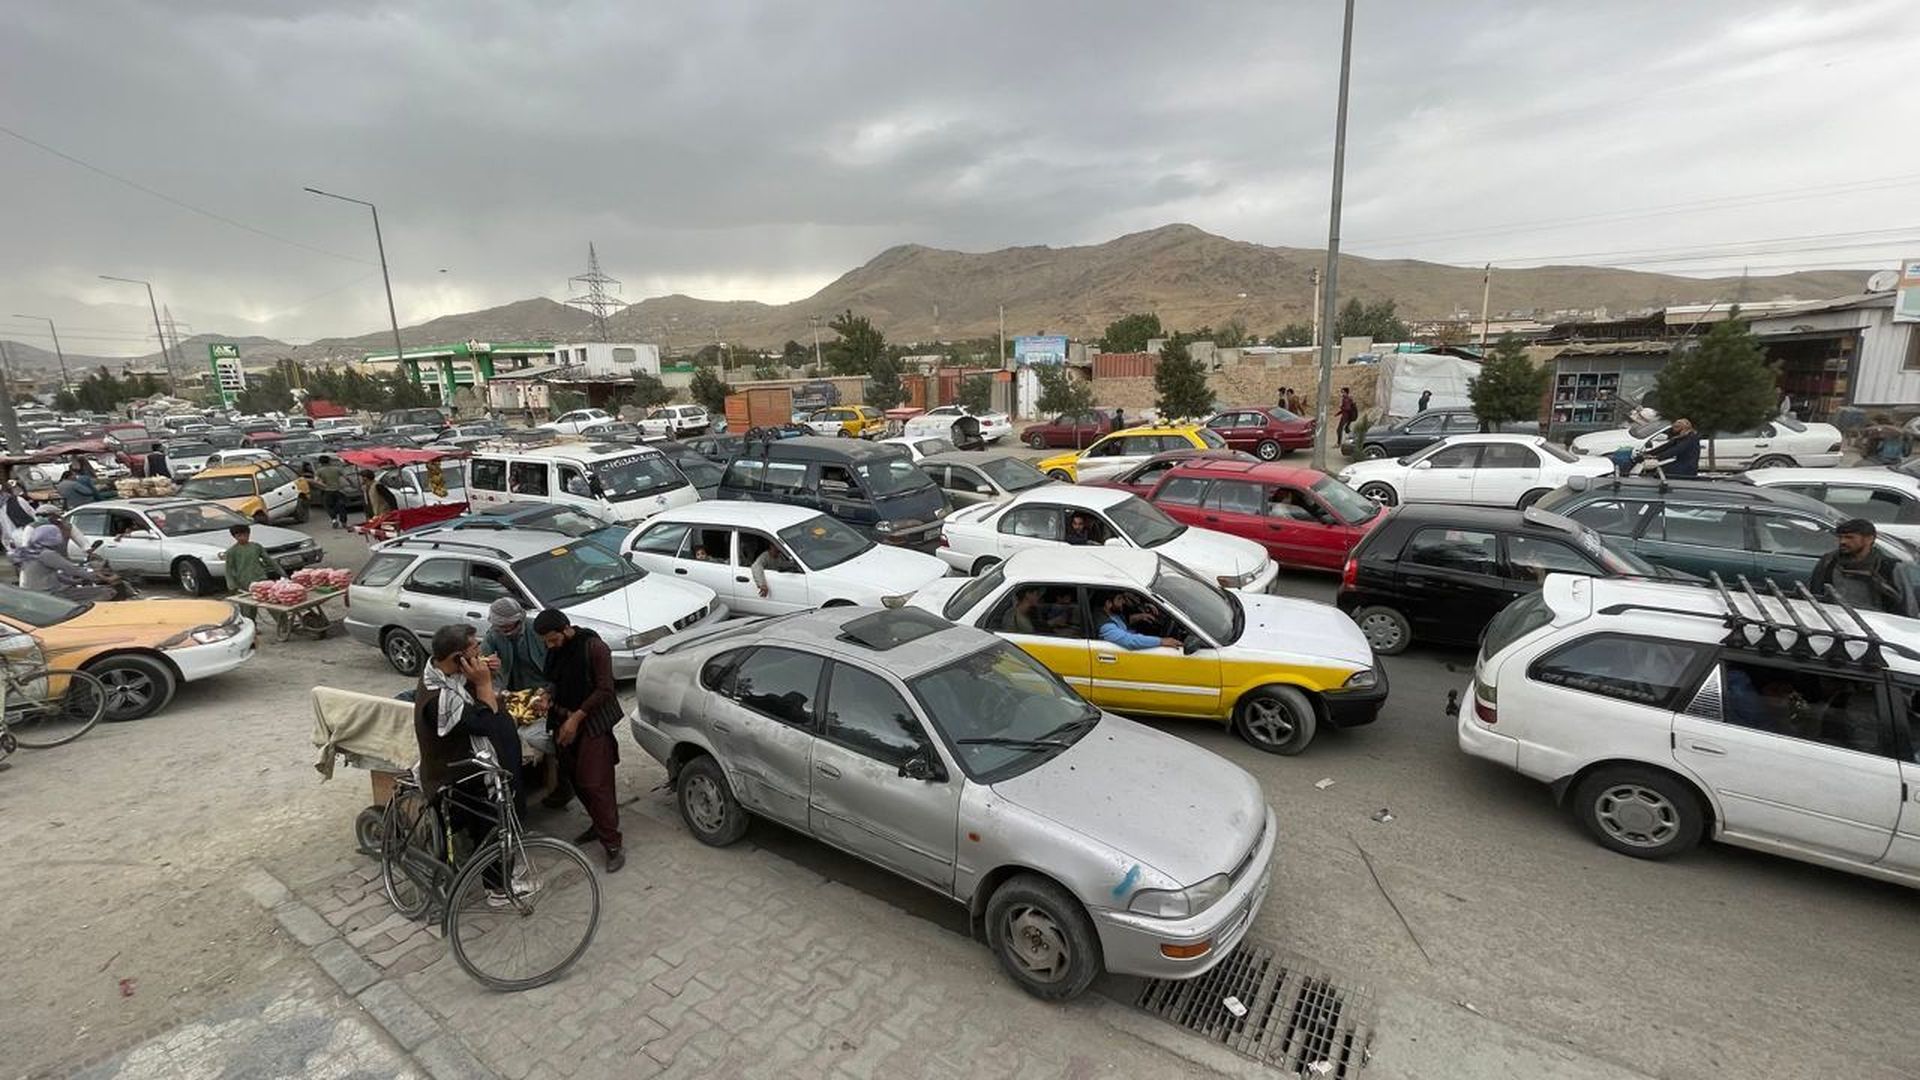 Afghans continue to wait around the Hamid Karzai International Airport as they try to leave the Afghan capital of Kabul, Afghanistan on August 21